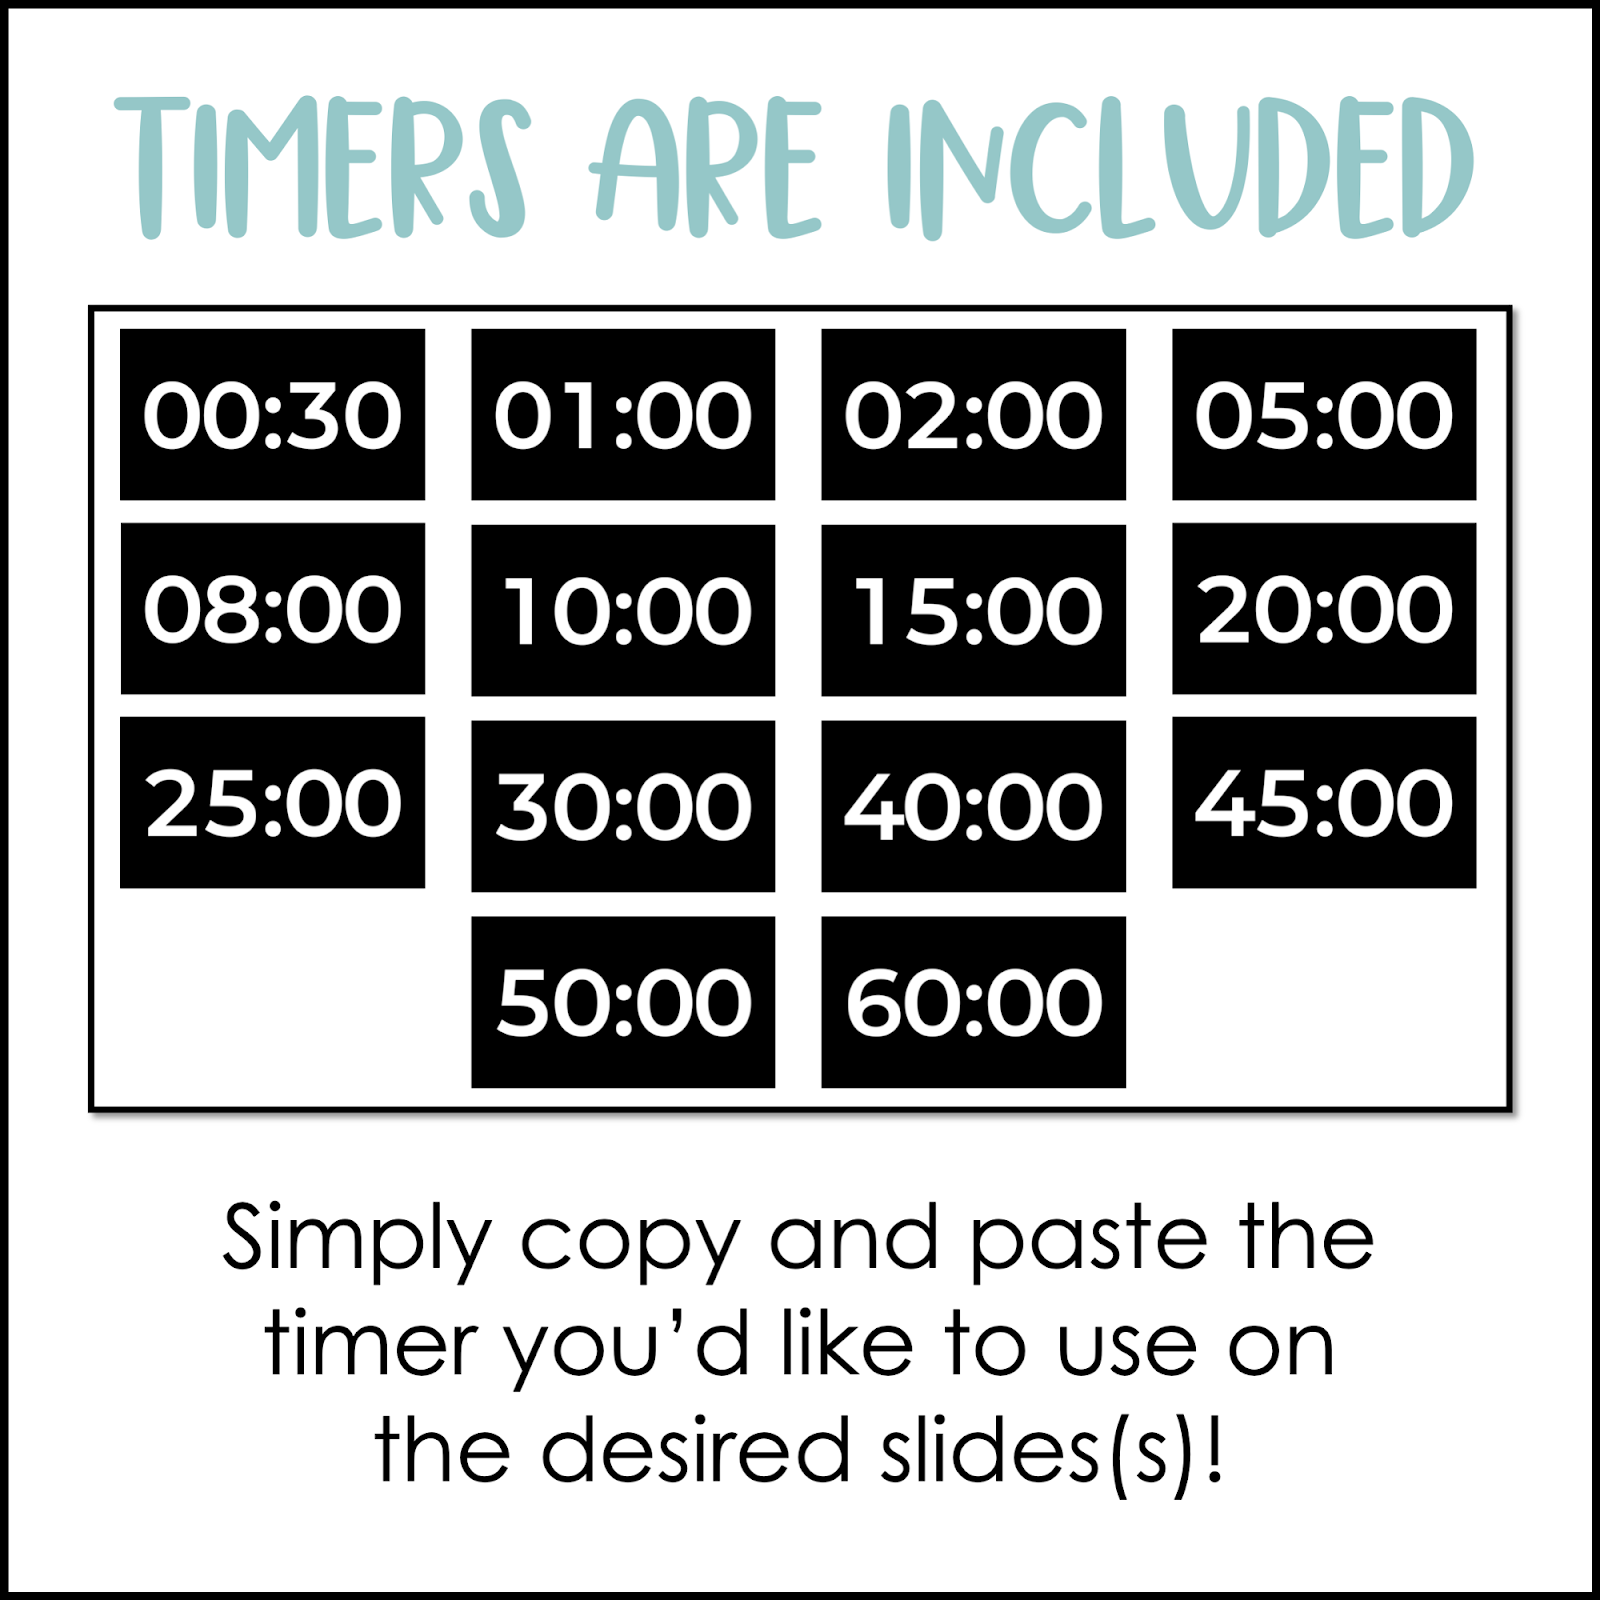 This image shows a bunch of different timers. There is a thirty-second timer, one minute, two minute, and more. The text on the top reads "Timers are included". 